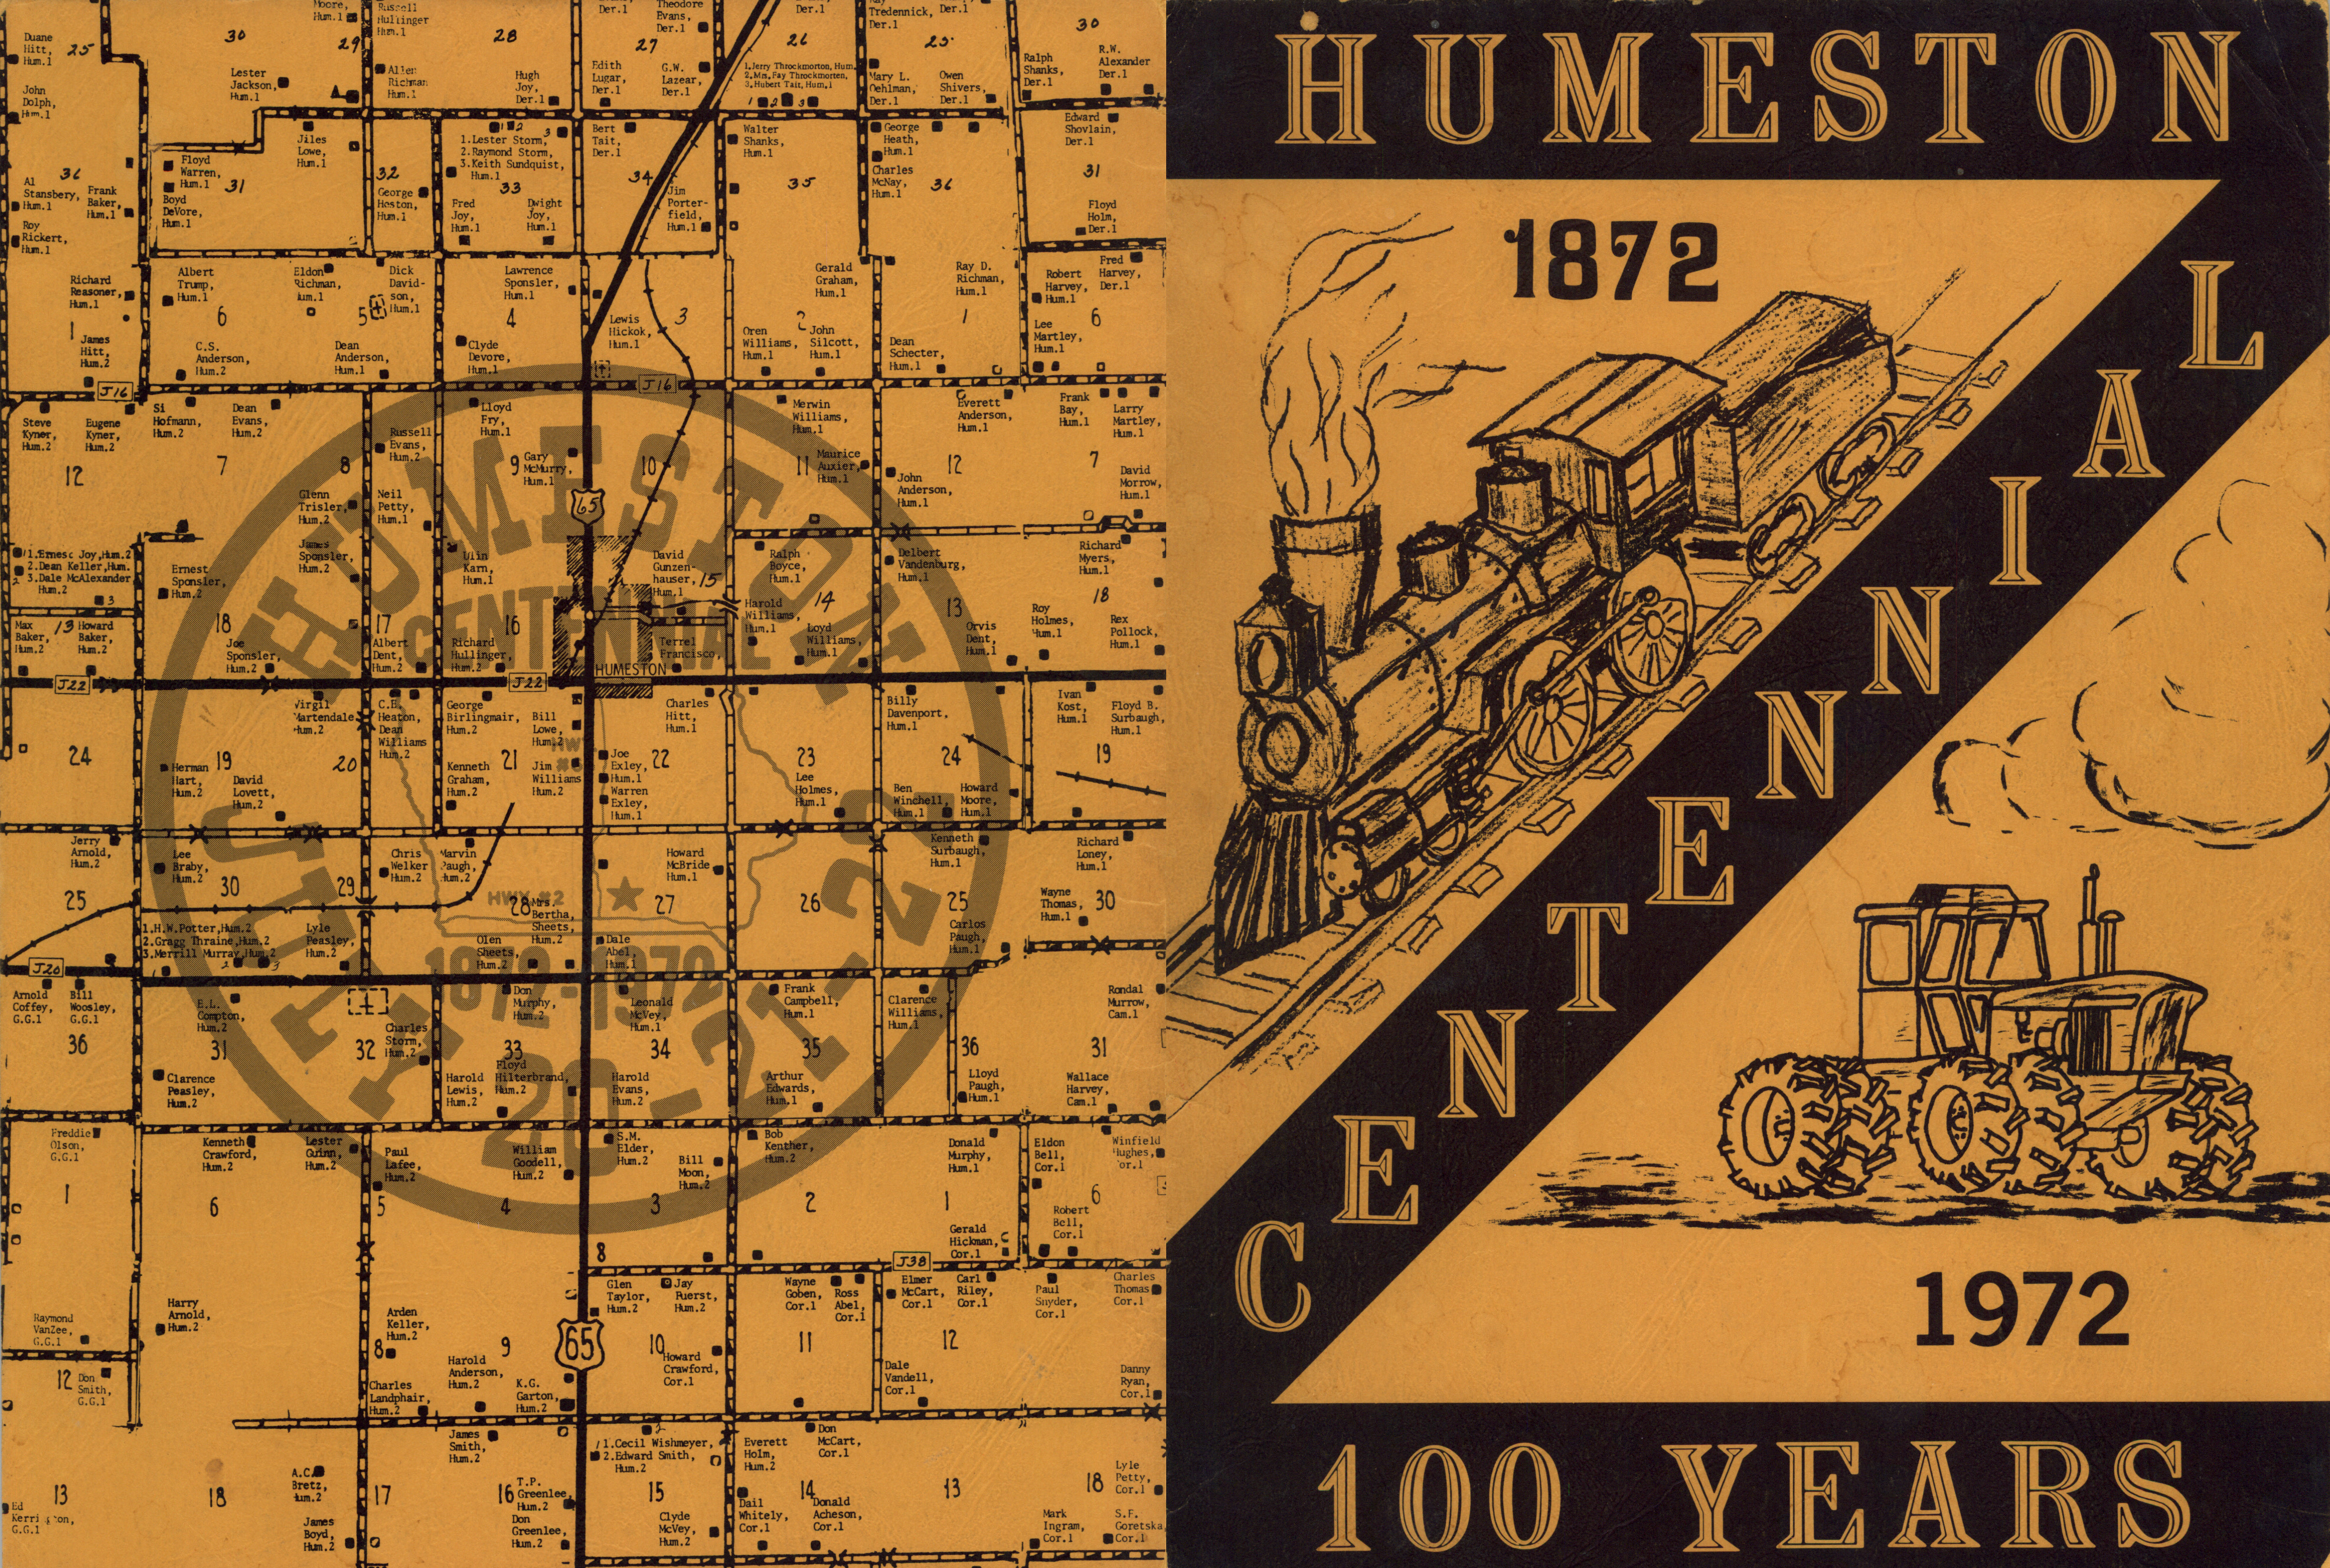 Humeston 100 Years - back and front cover